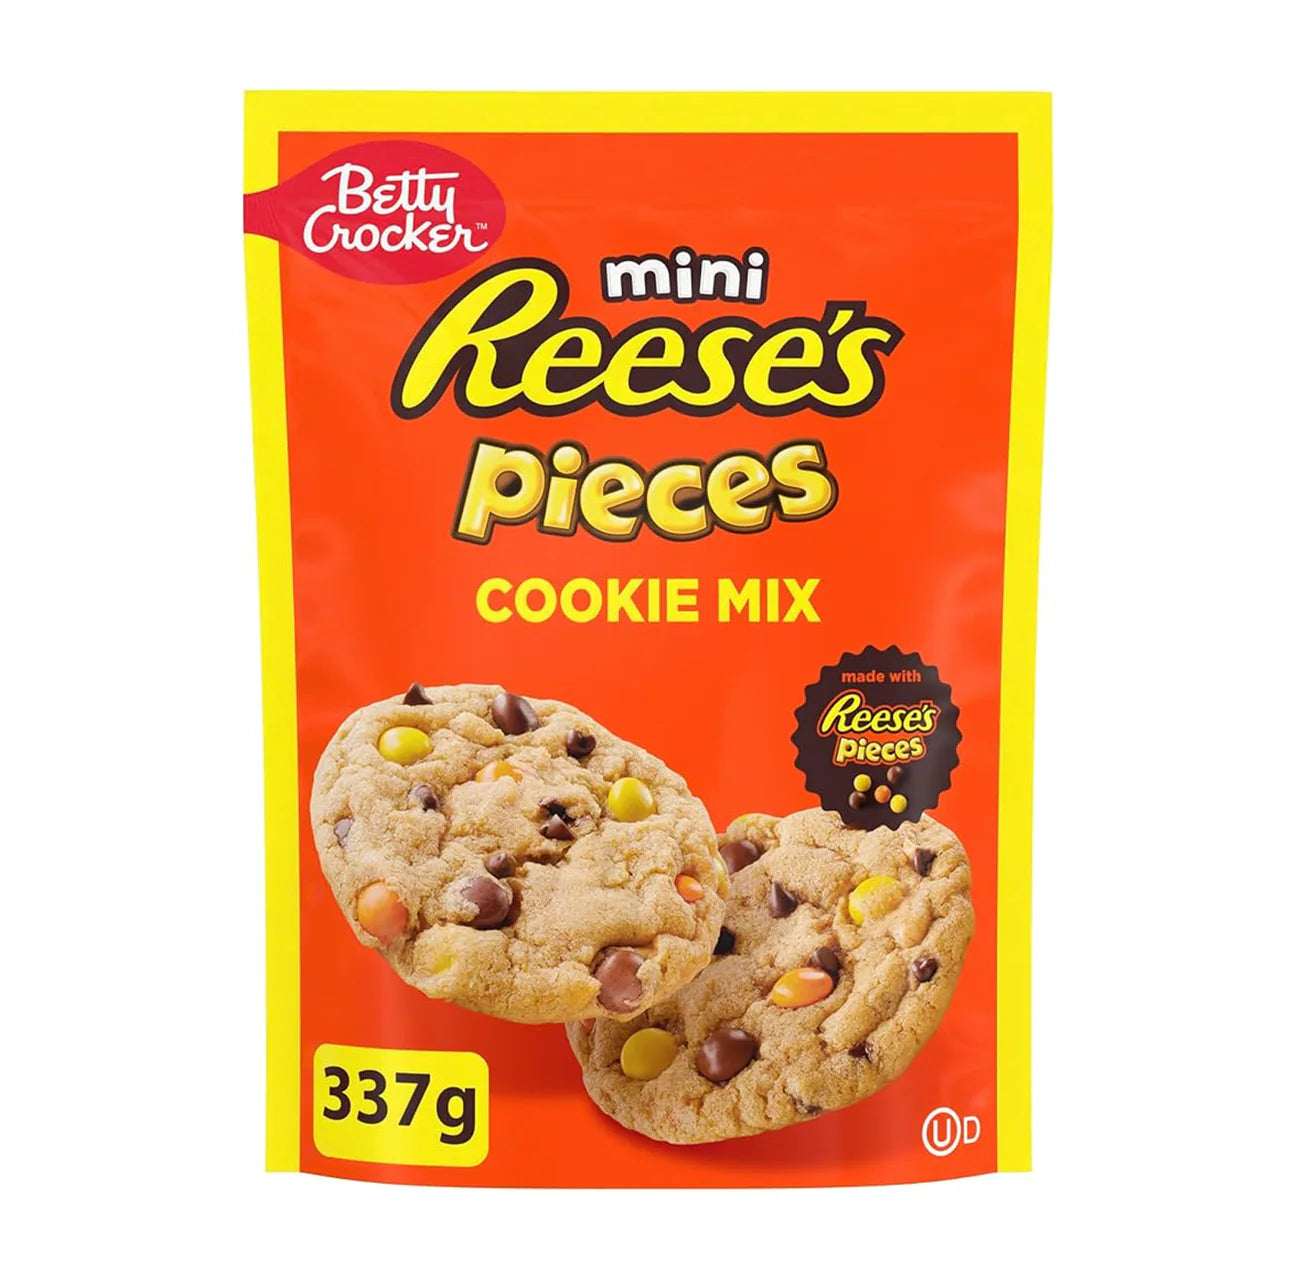 Reese's Pieces Peanut Butter Cookie Mix (337g)